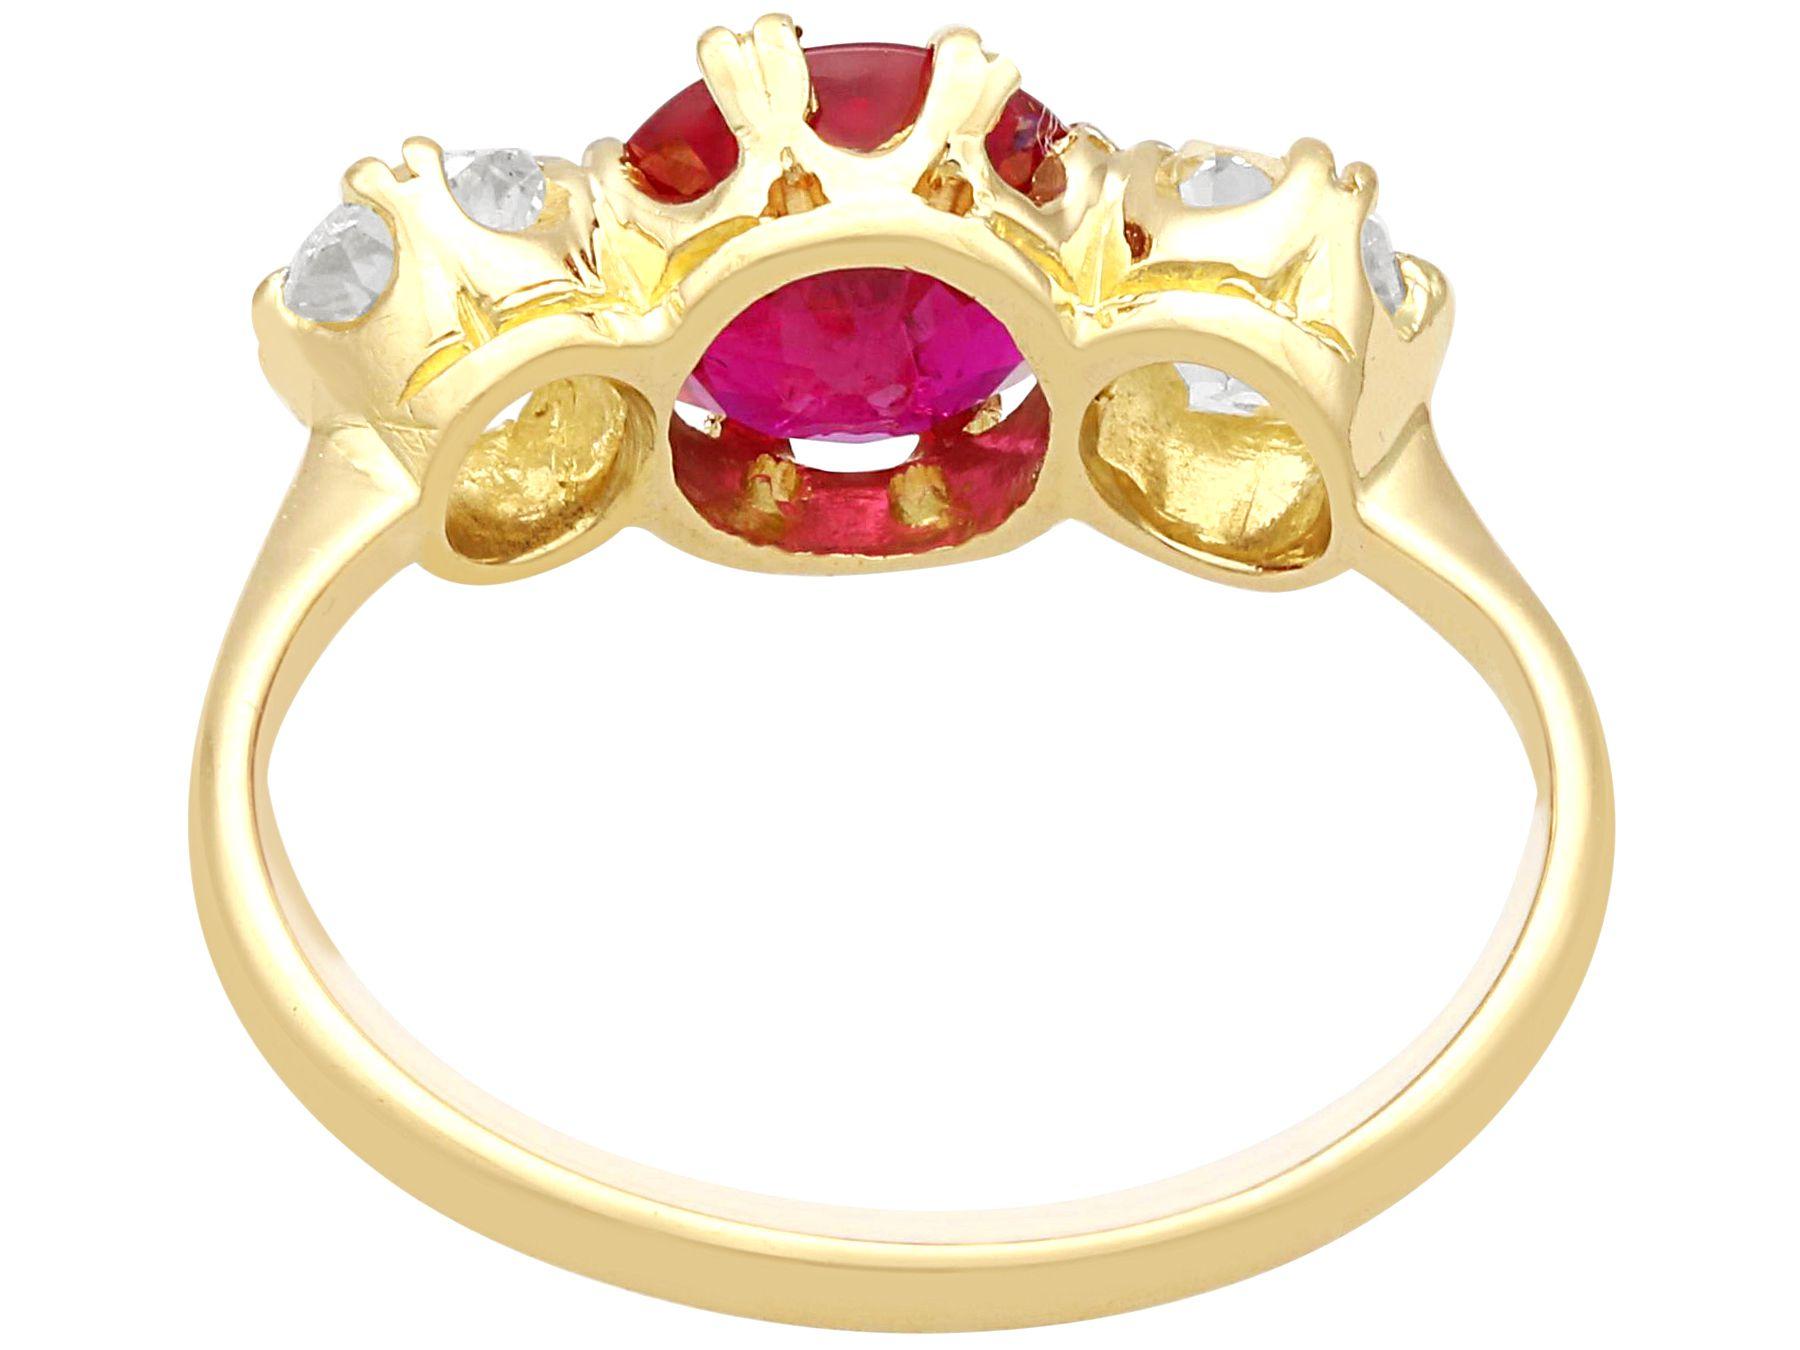 Antique 1.65 Carat Ruby and 1.07 Carat Diamond Yellow Gold Trilogy Ring In Excellent Condition For Sale In Jesmond, Newcastle Upon Tyne